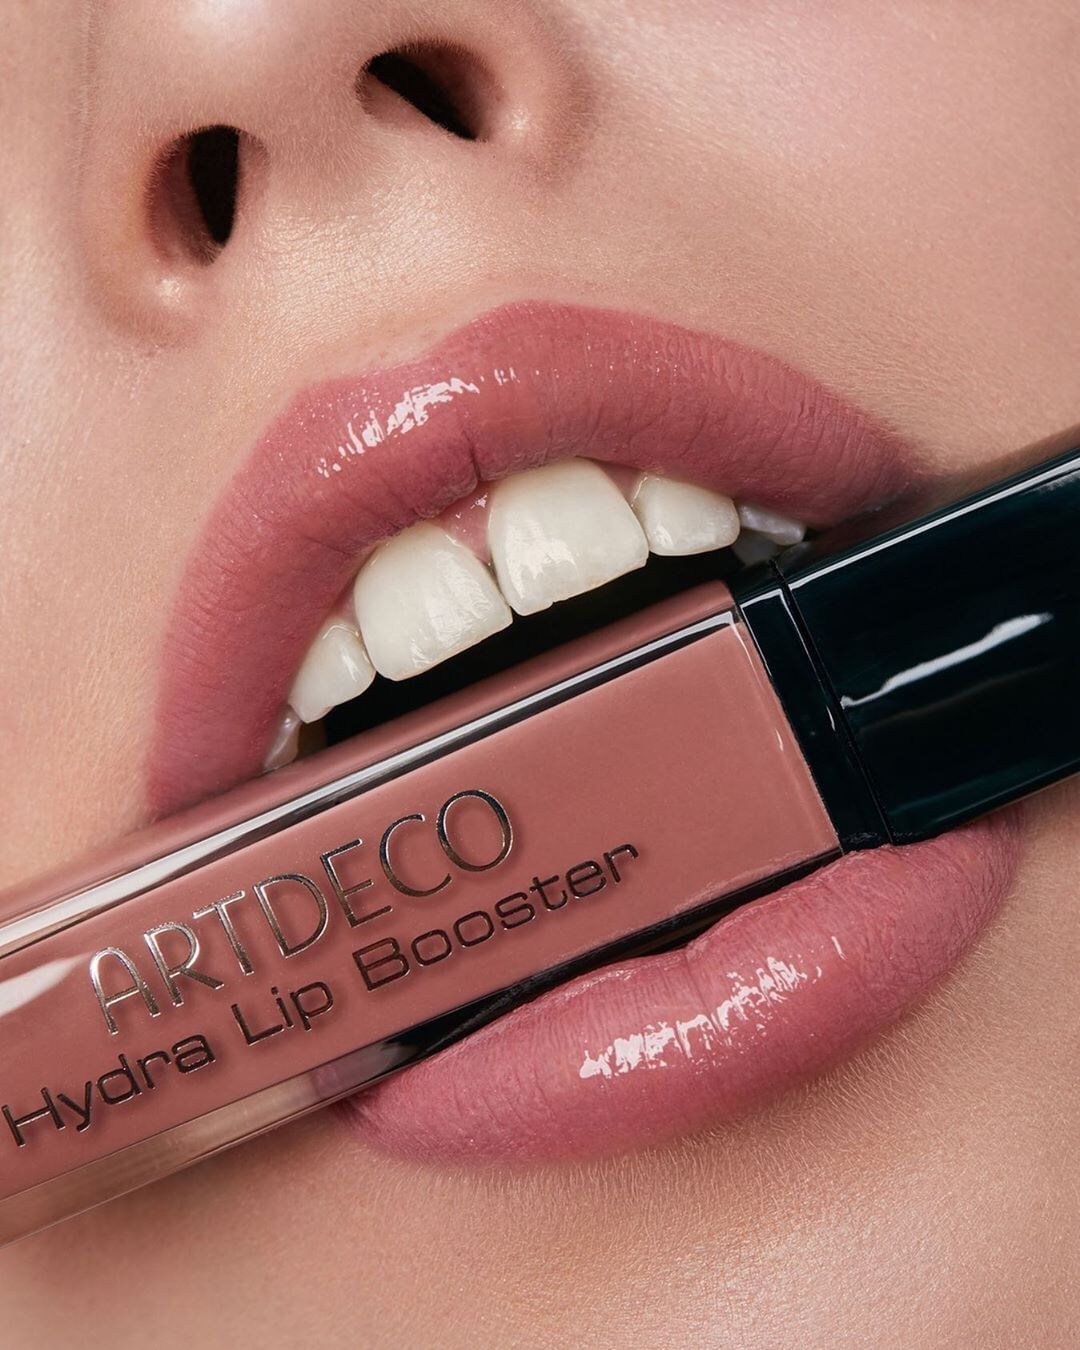 ARTDECO - Our Hydra Lip Booster has the ultimate "care elixir" for your lips with a trace of color and wonderful shine.⠀⠀⠀⠀⠀⠀⠀⠀⠀
⠀⠀⠀⠀⠀⠀⠀⠀⠀
👄 Hydra Lip Booster N°36 translucent rosewood⠀⠀⠀⠀⠀⠀⠀⠀⠀
⠀⠀⠀⠀⠀⠀...